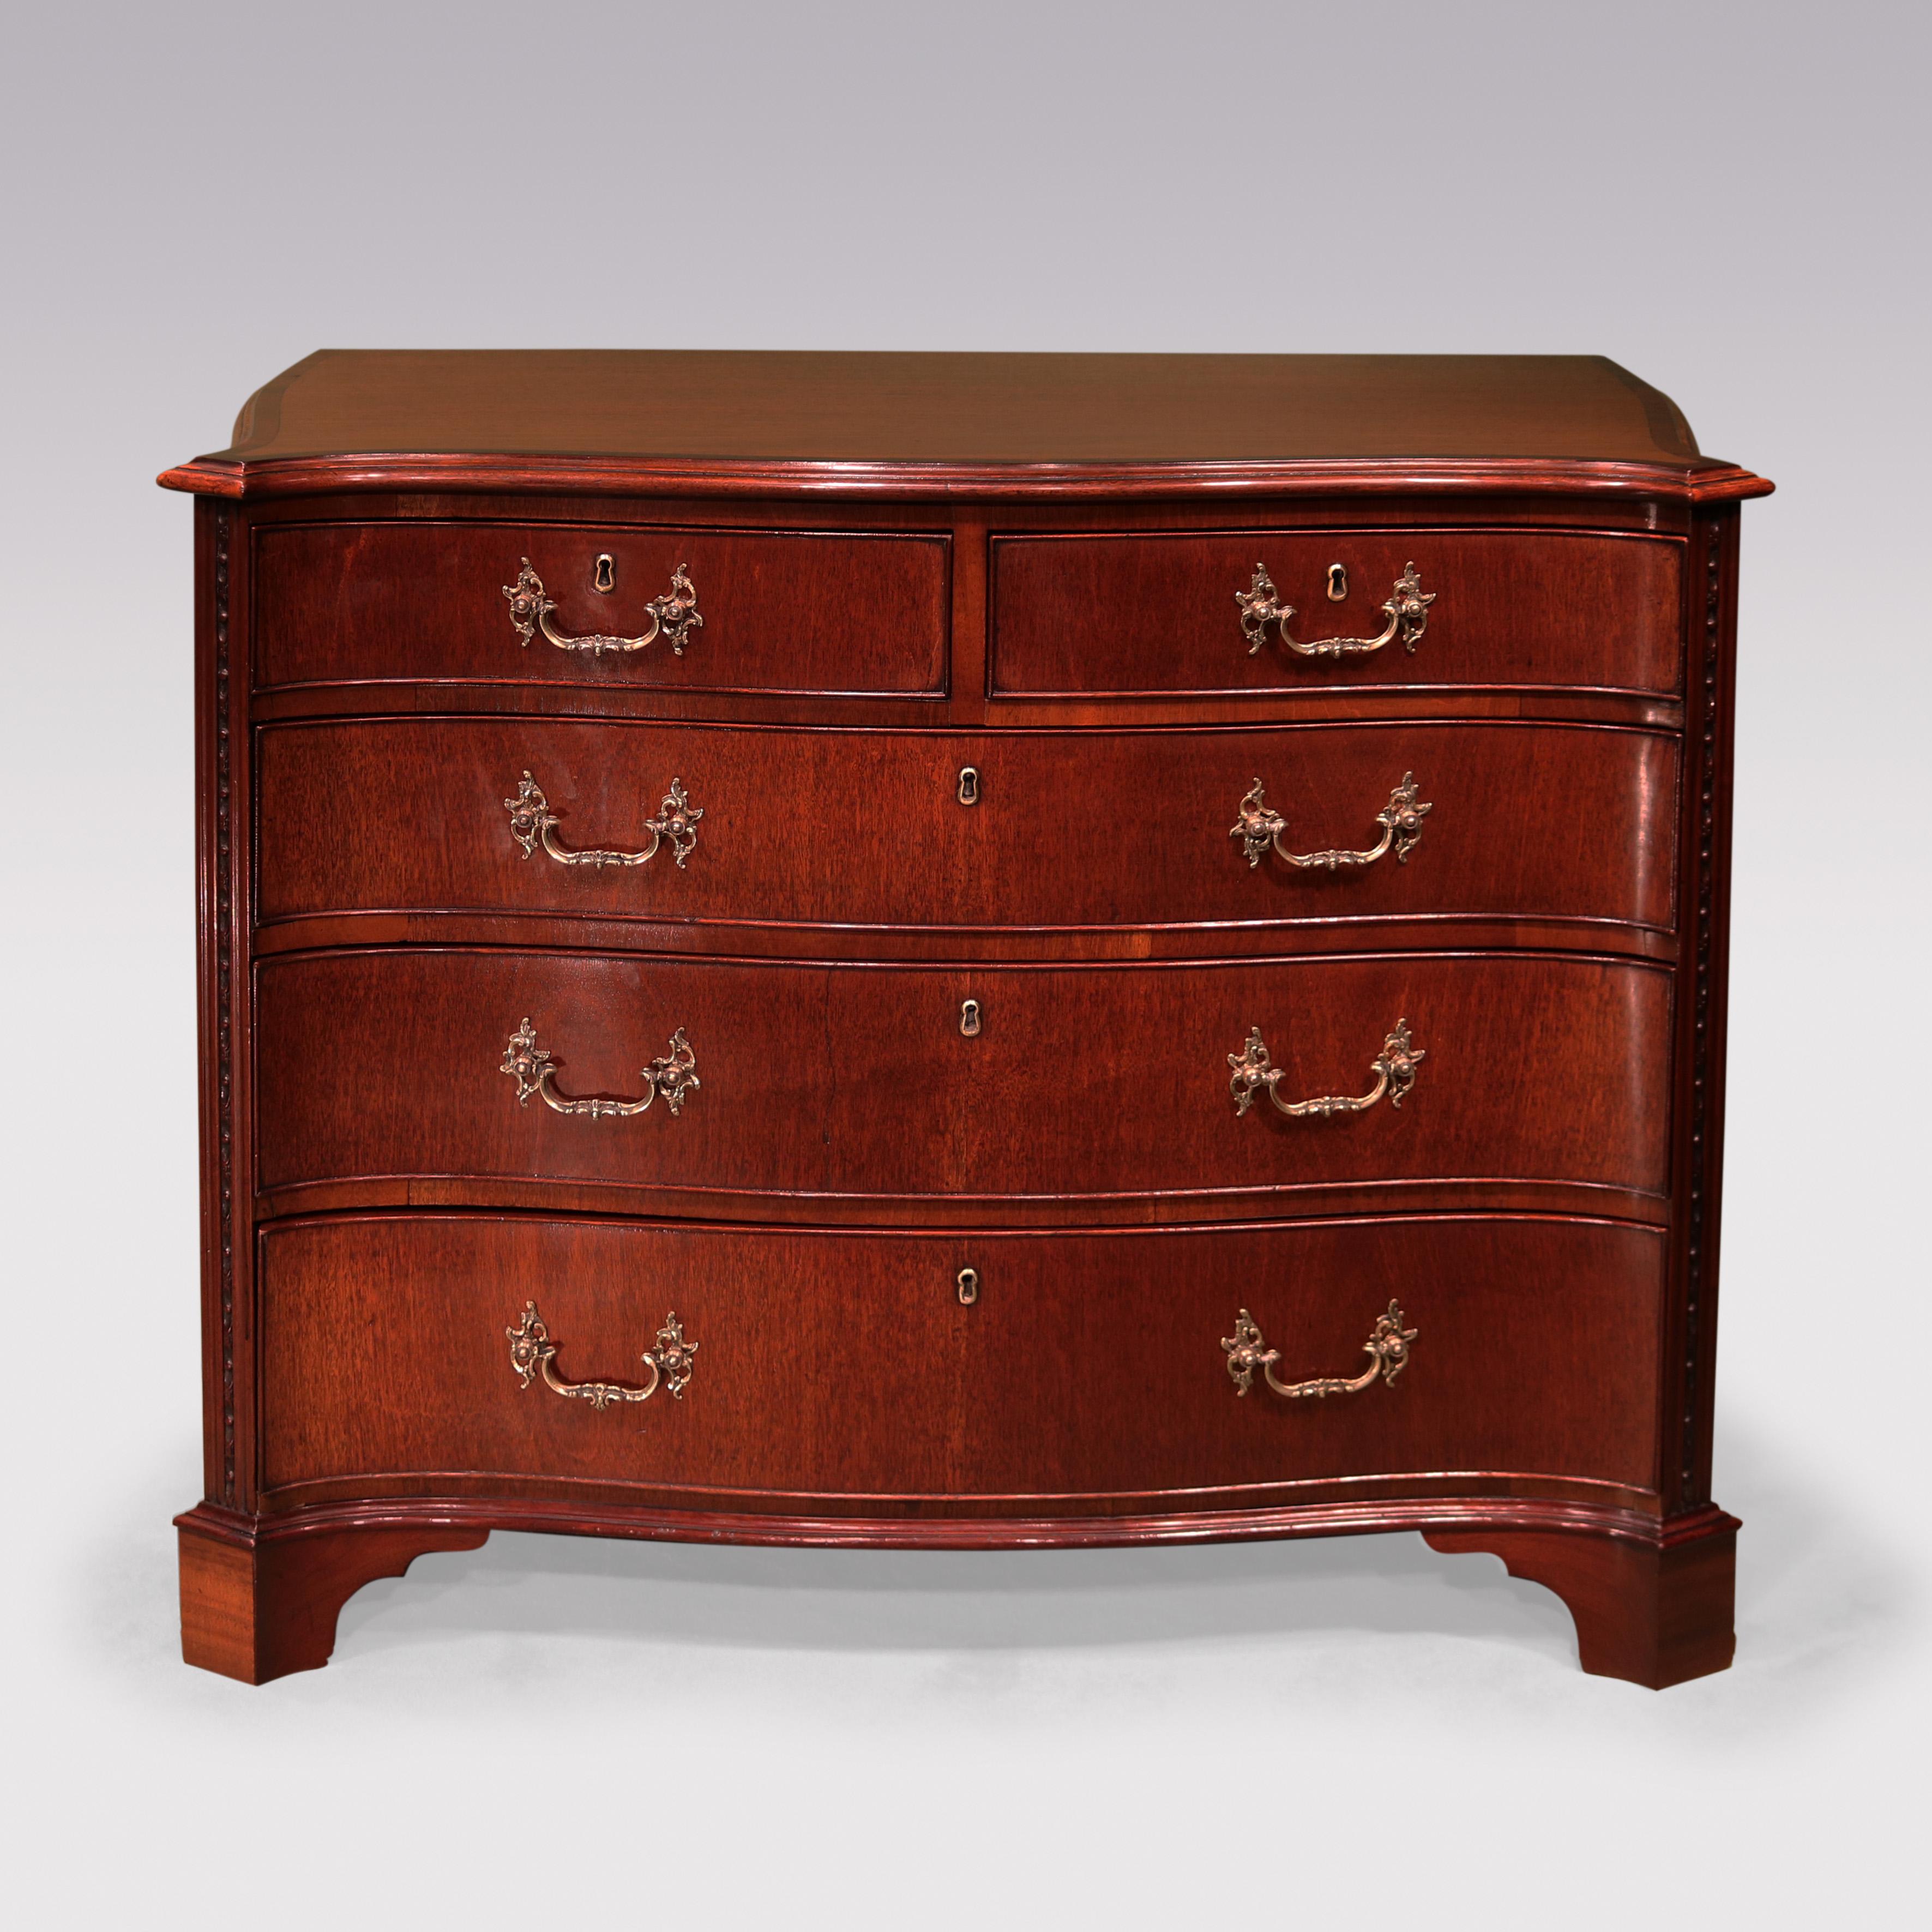 A mid-18th Century Chippendale period mahogany serpentine Chest, having moulded edged crossbanded canted cornered top above 2 short & 3 long cockbeaded drawers retaining original brass rococo handles, flanked by moulded & carved columns supported on